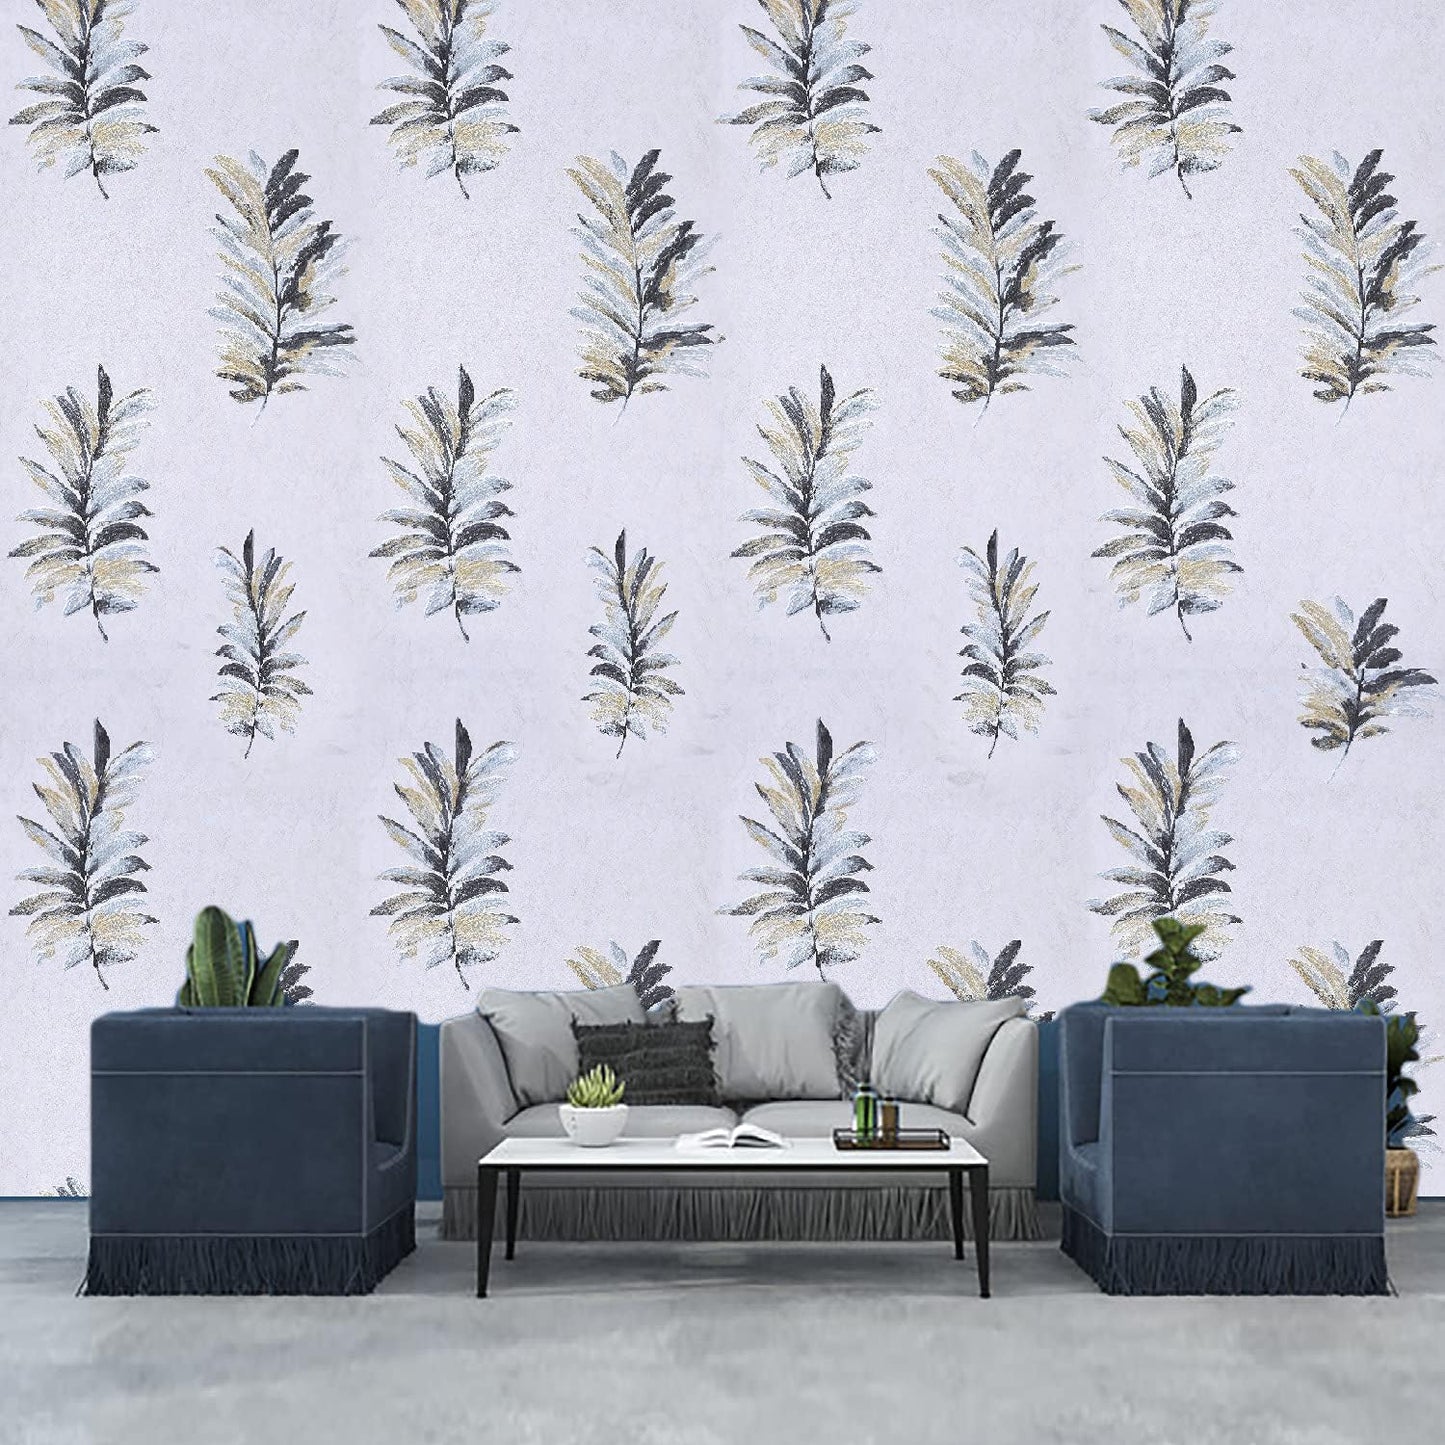 3D Latest Fern Design Blue & Brown Wallpaper Roll for Home Walls 57 Sq Ft (0.53m or 33 Feet)